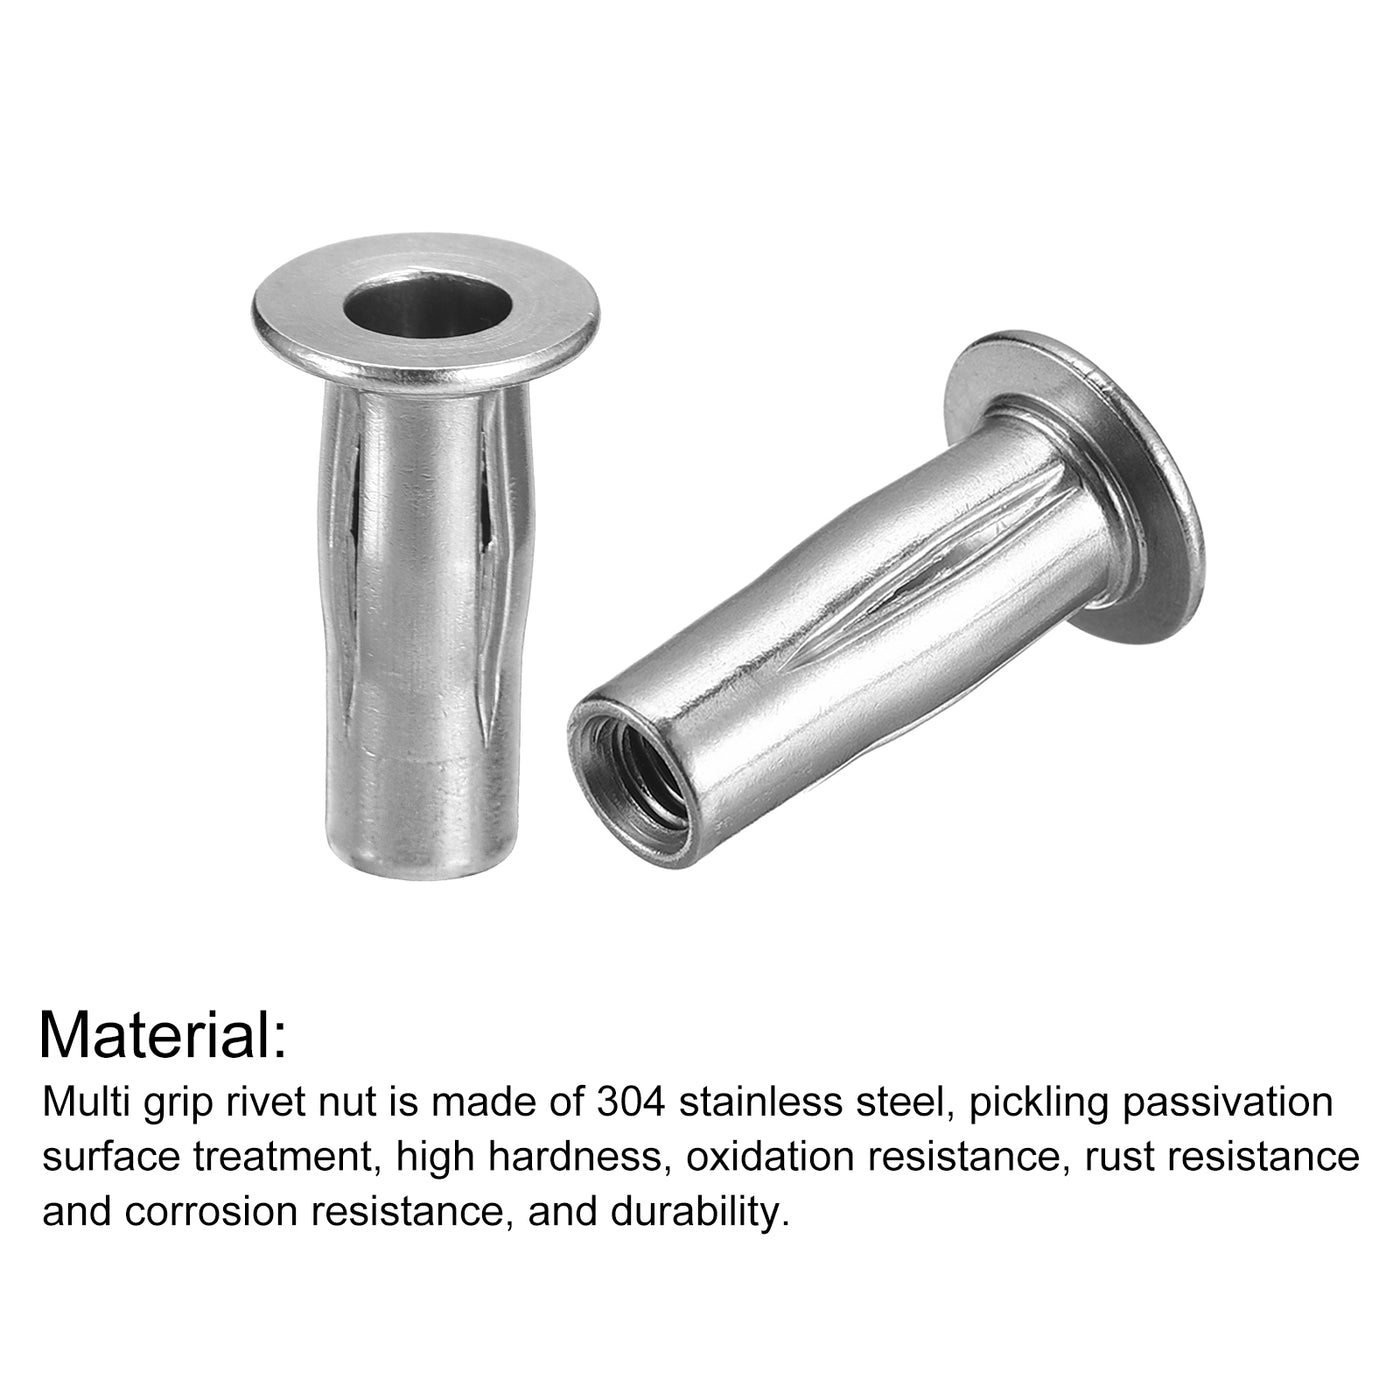 uxcell Uxcell Multi-Grip Rivet Nuts, Pre-Bulbed Shank Flat Head Threaded Insert Nut 304 Stainless Steel Plus Nuts